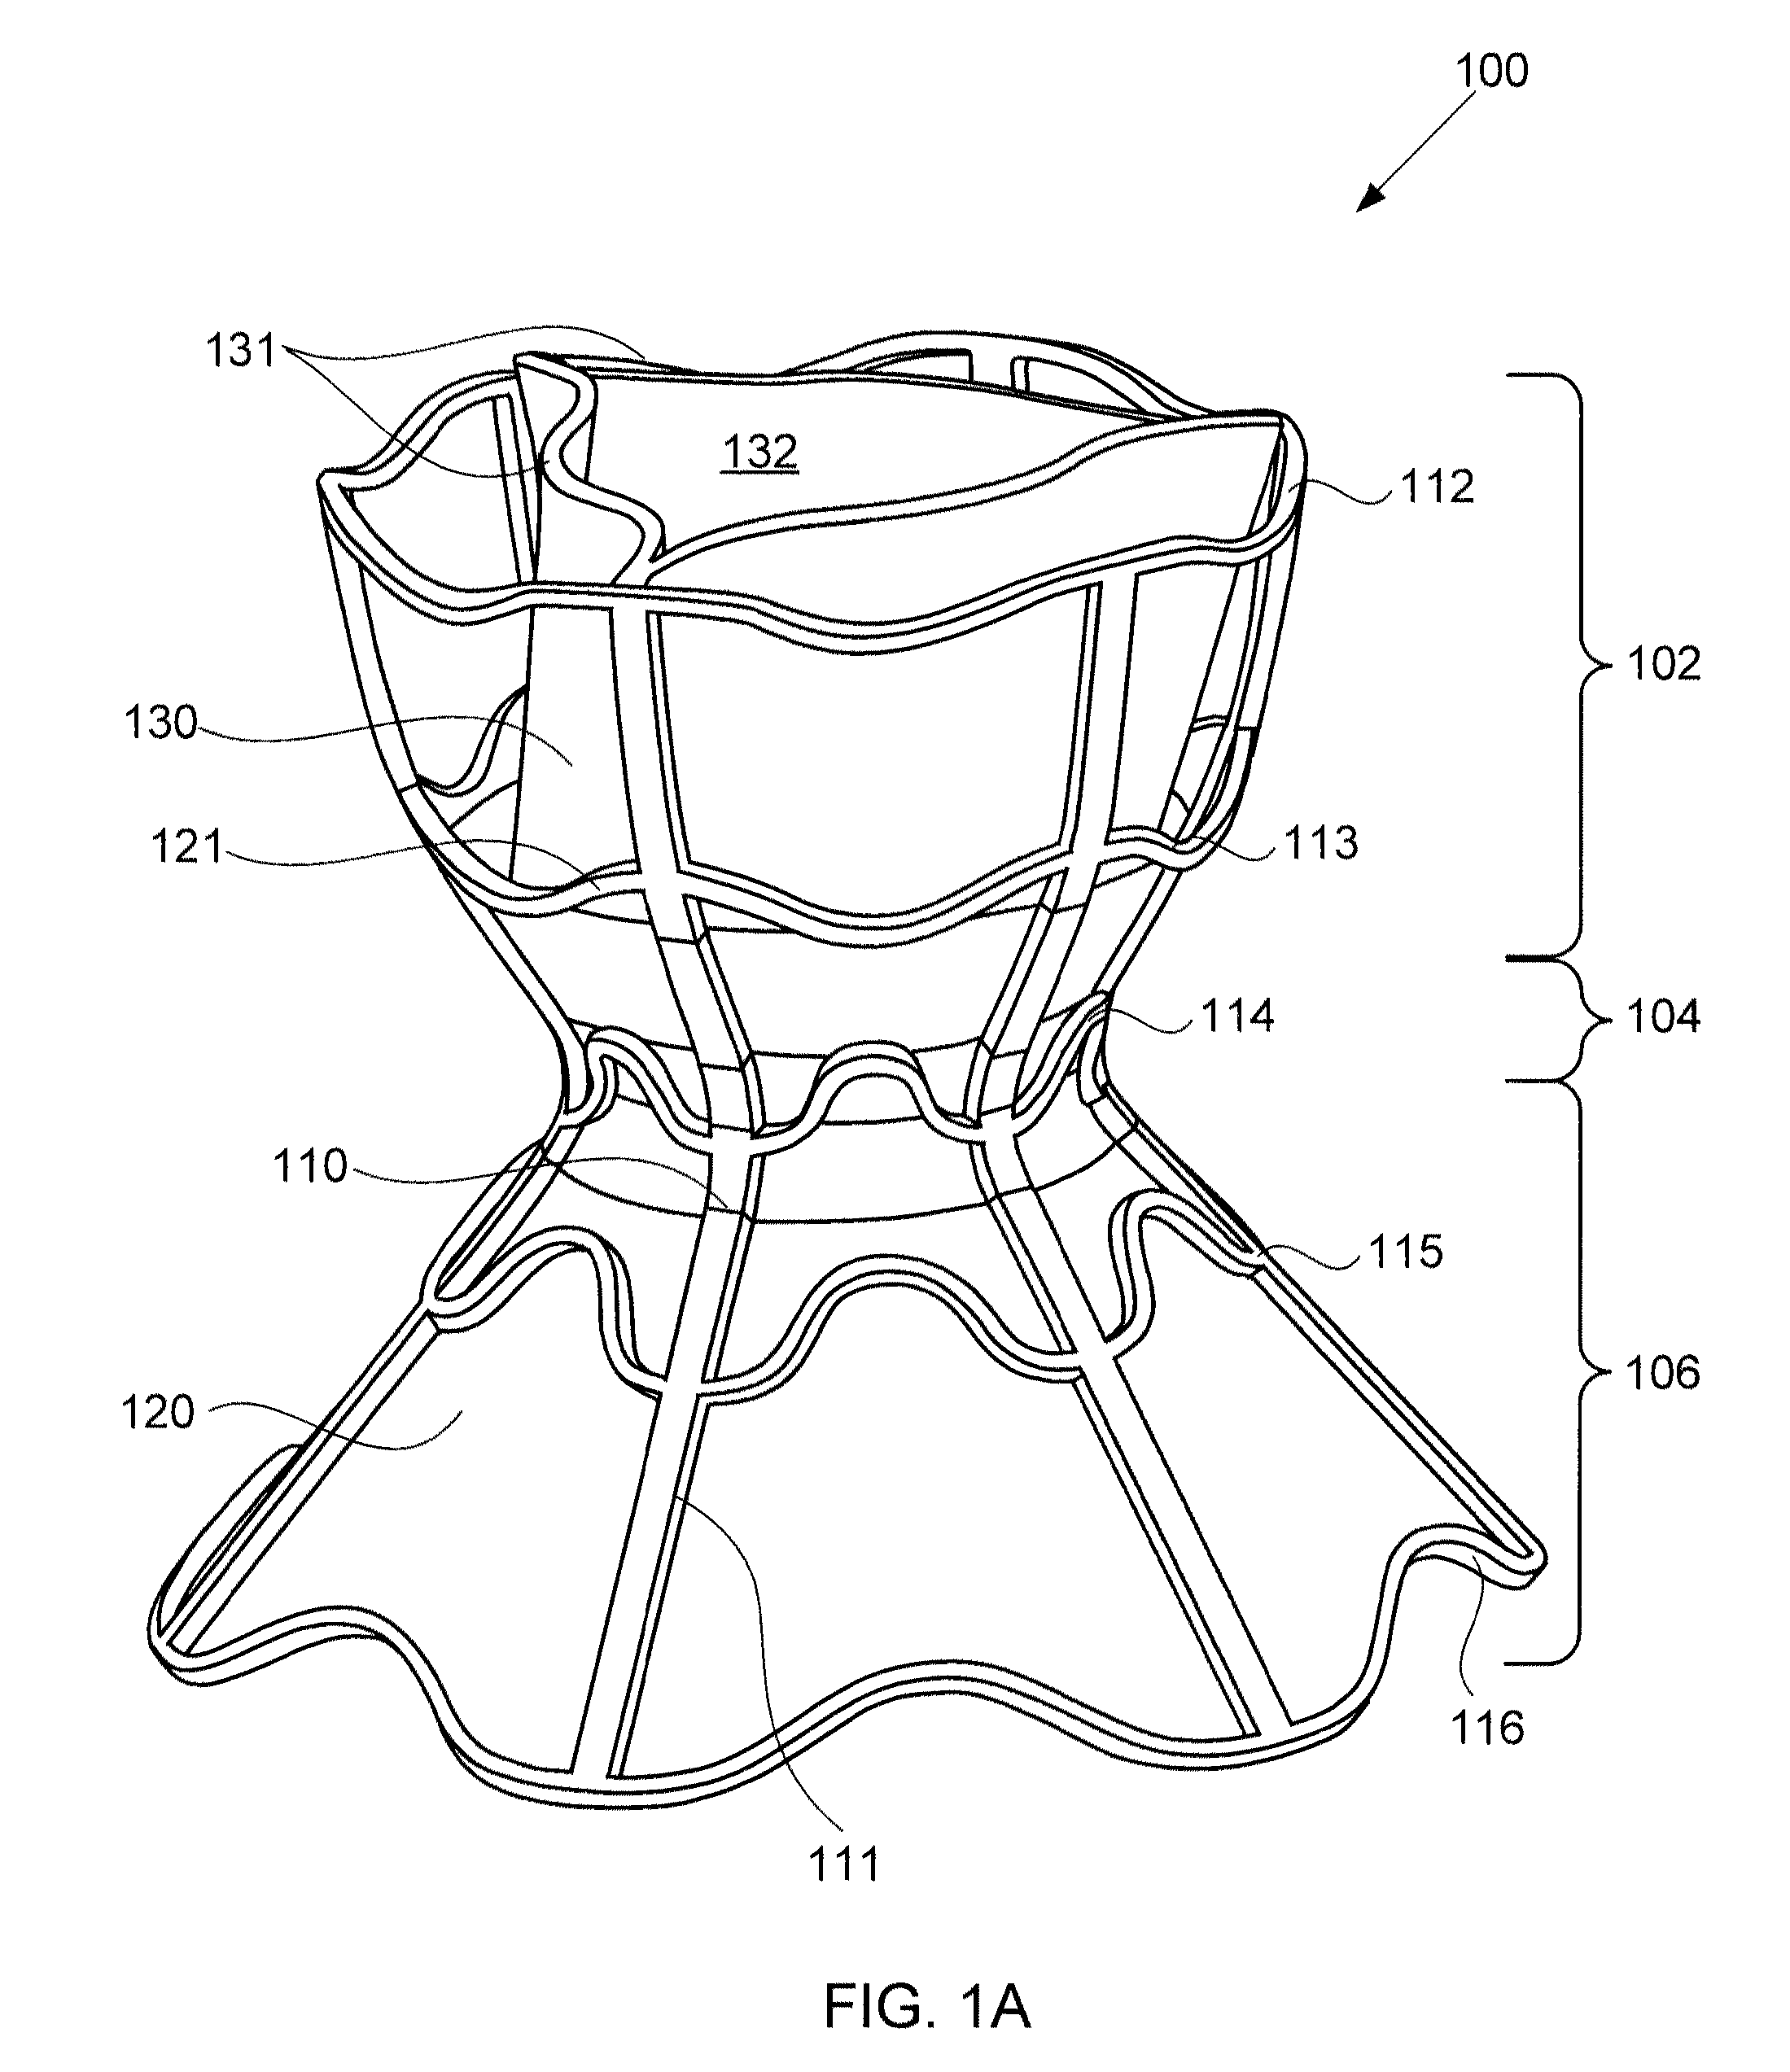 Devices for reducing left atrial pressure, and methods of making and using same